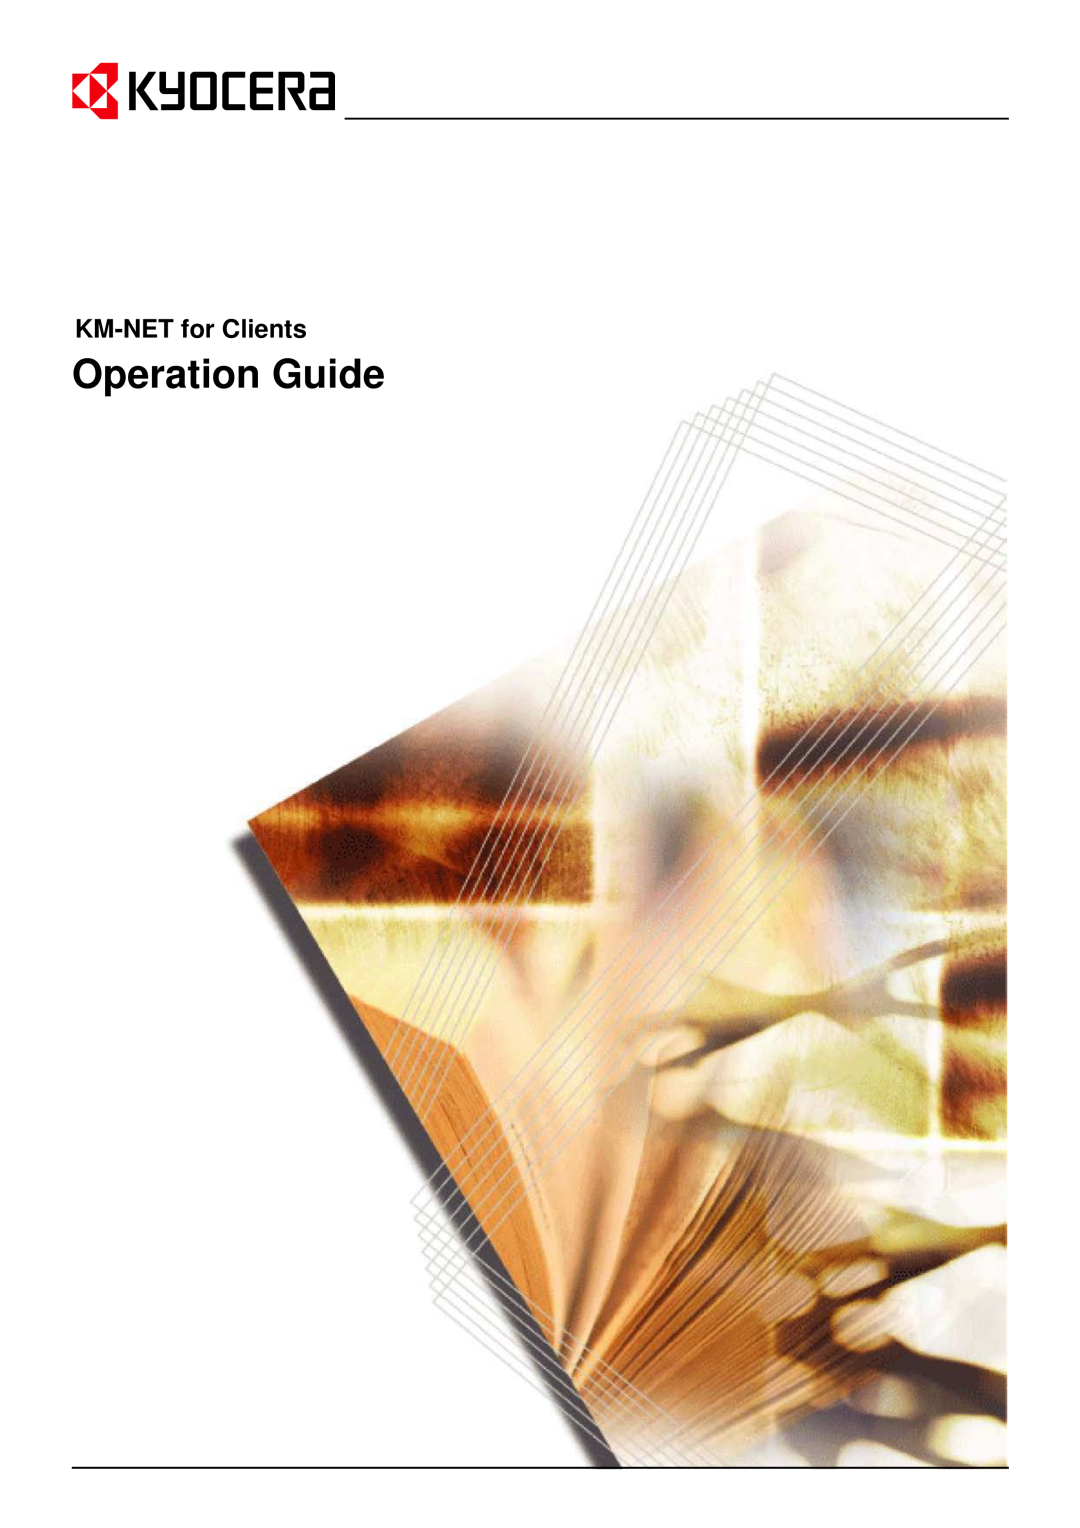 Kyocera manual KM-NETfor Clients, Operation Guide 